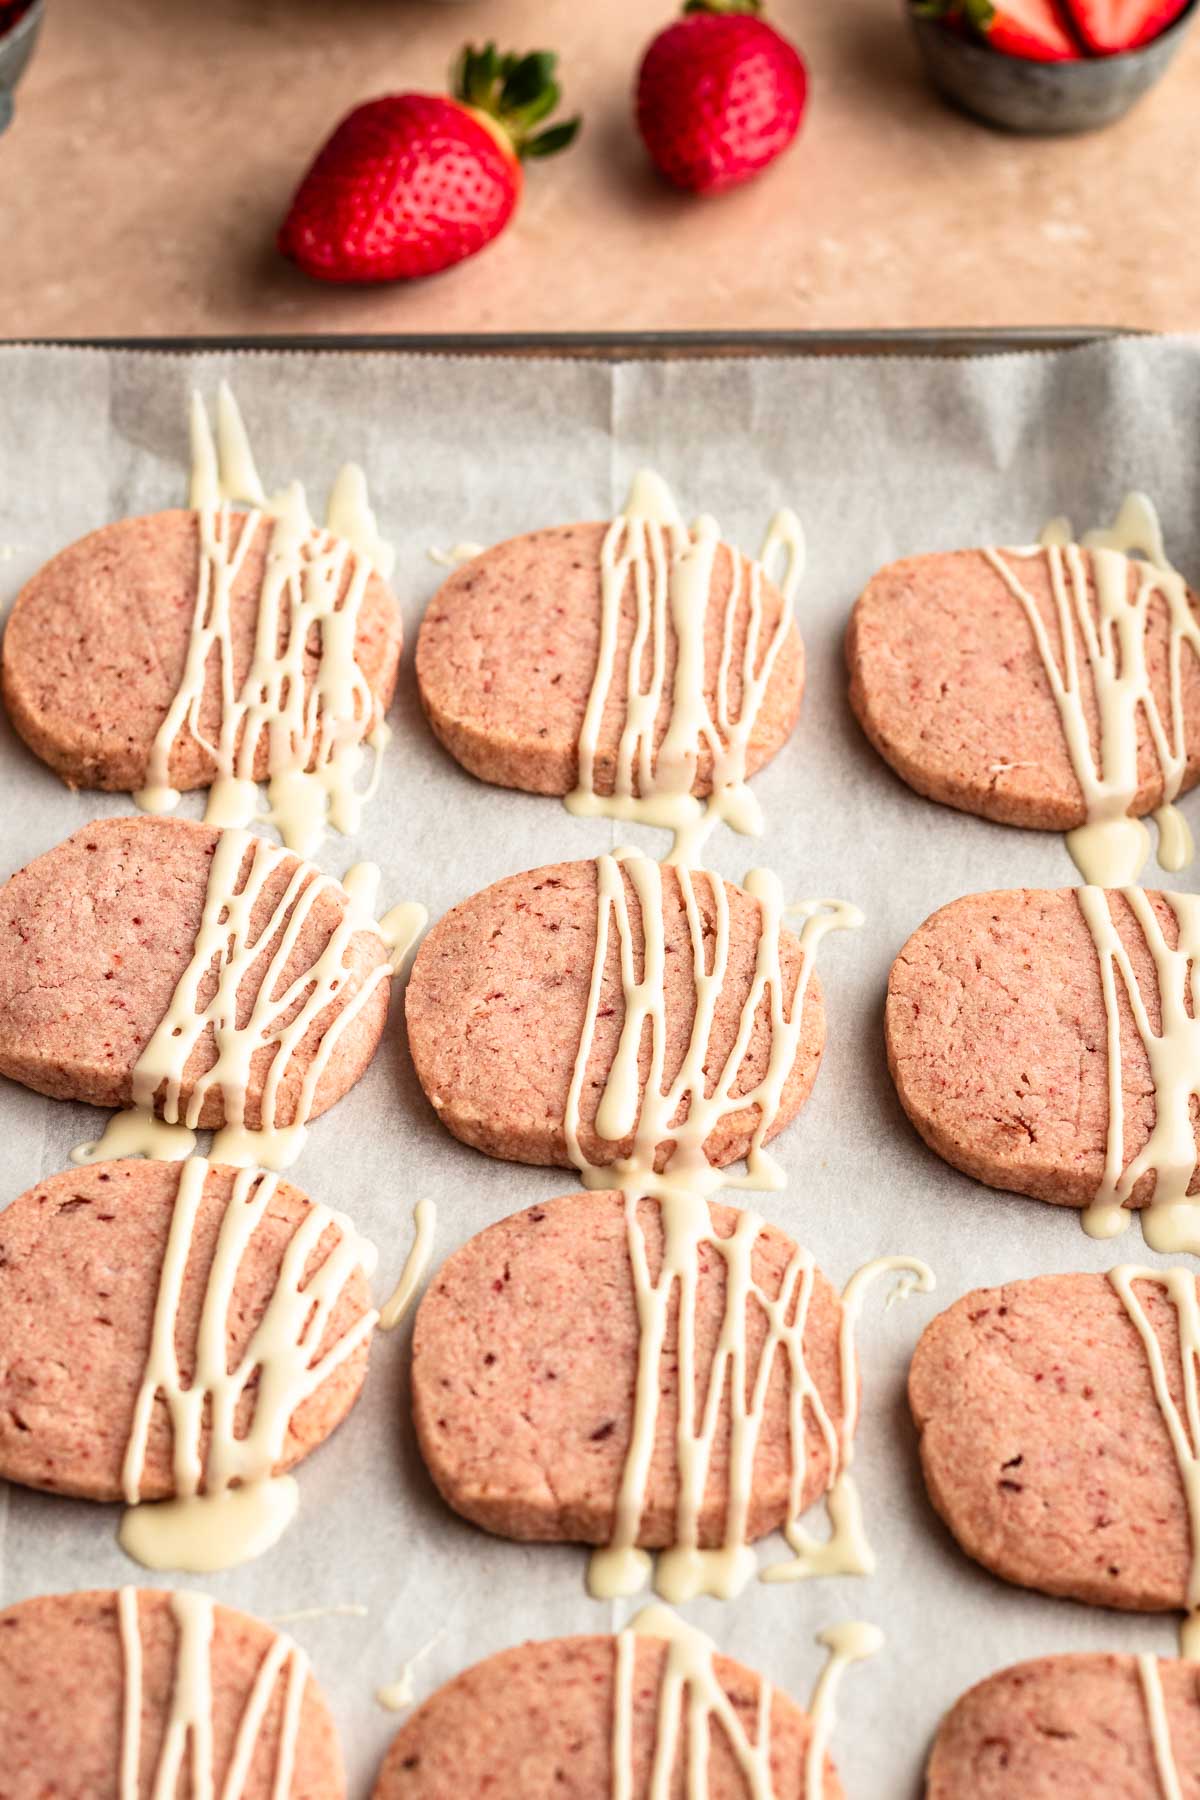 Strawberry shortbread cookies on a baking pan.